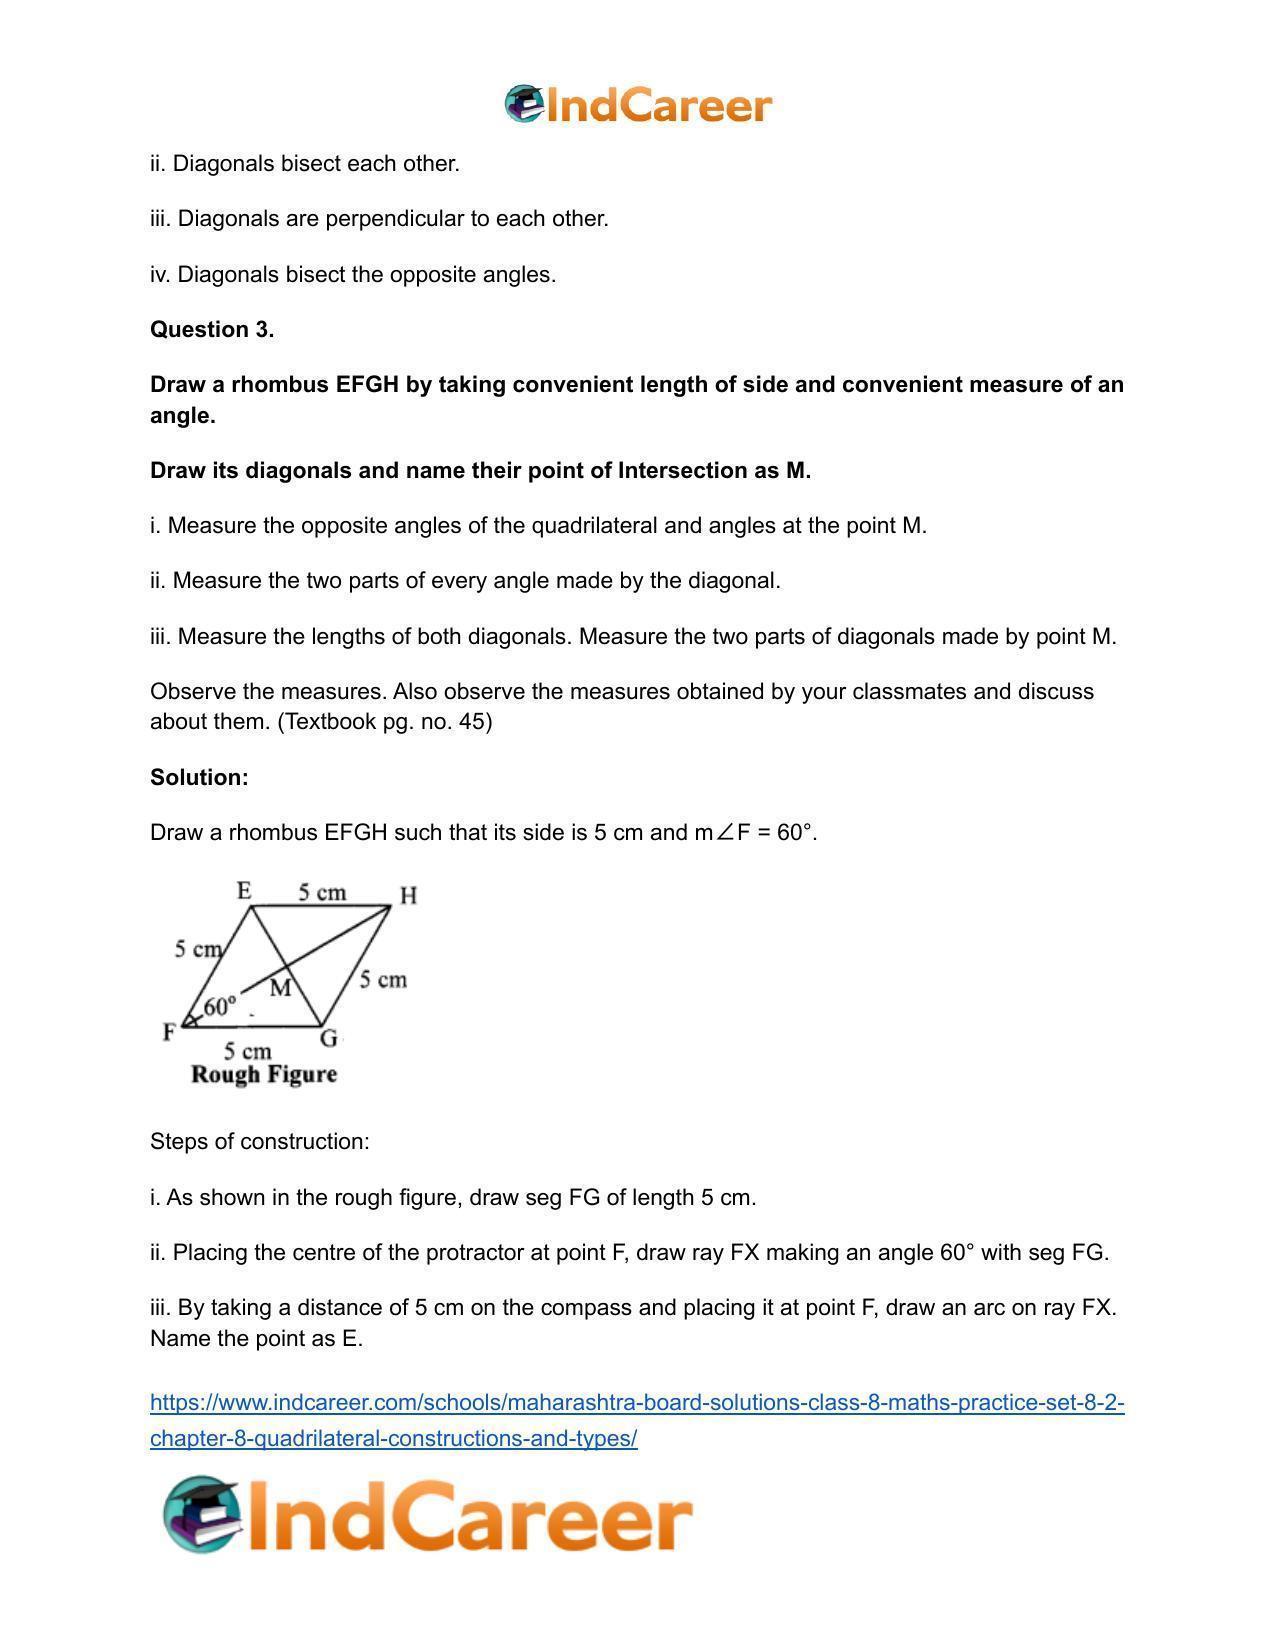 Maharashtra Board Solutions Class 8-Maths (Practice Set 8.2): Chapter 8- Quadrilateral: Constructions and Types - Page 15